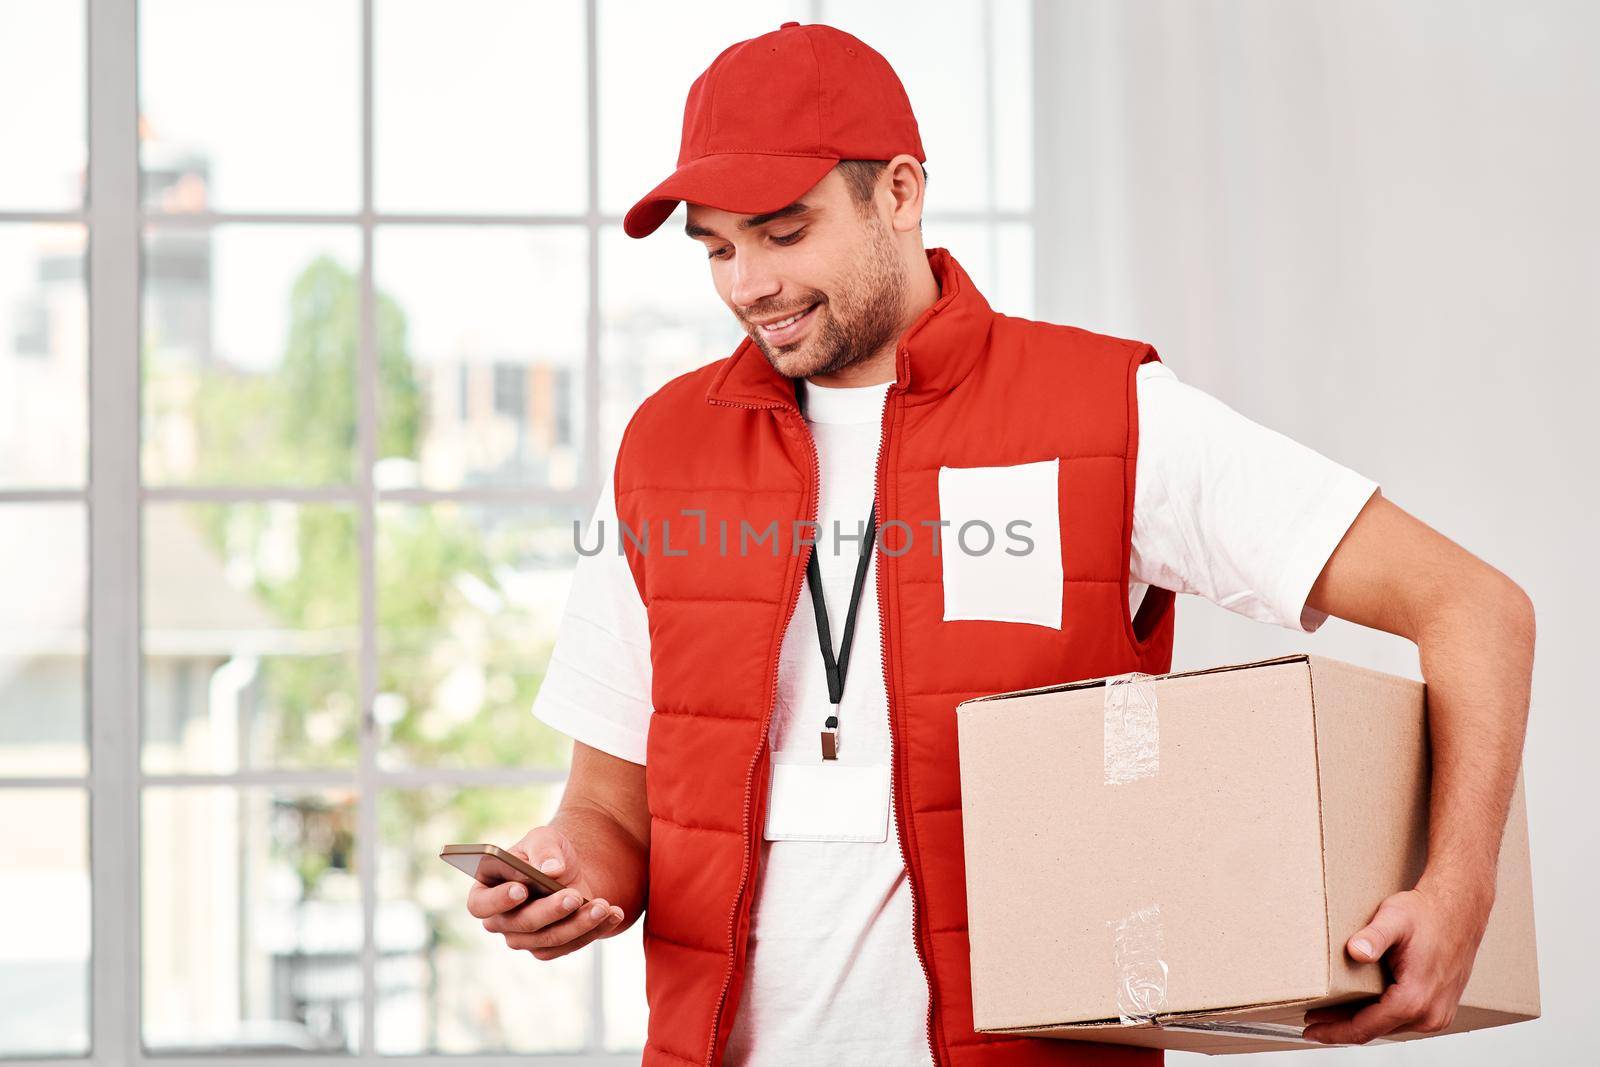 Busy postman wearing red postal uniform is delivering parcel to a client. He holds carton box and looking at his phone while searching customer number. Friendly worker, high quality delivery service. Indoors. Bright interior.